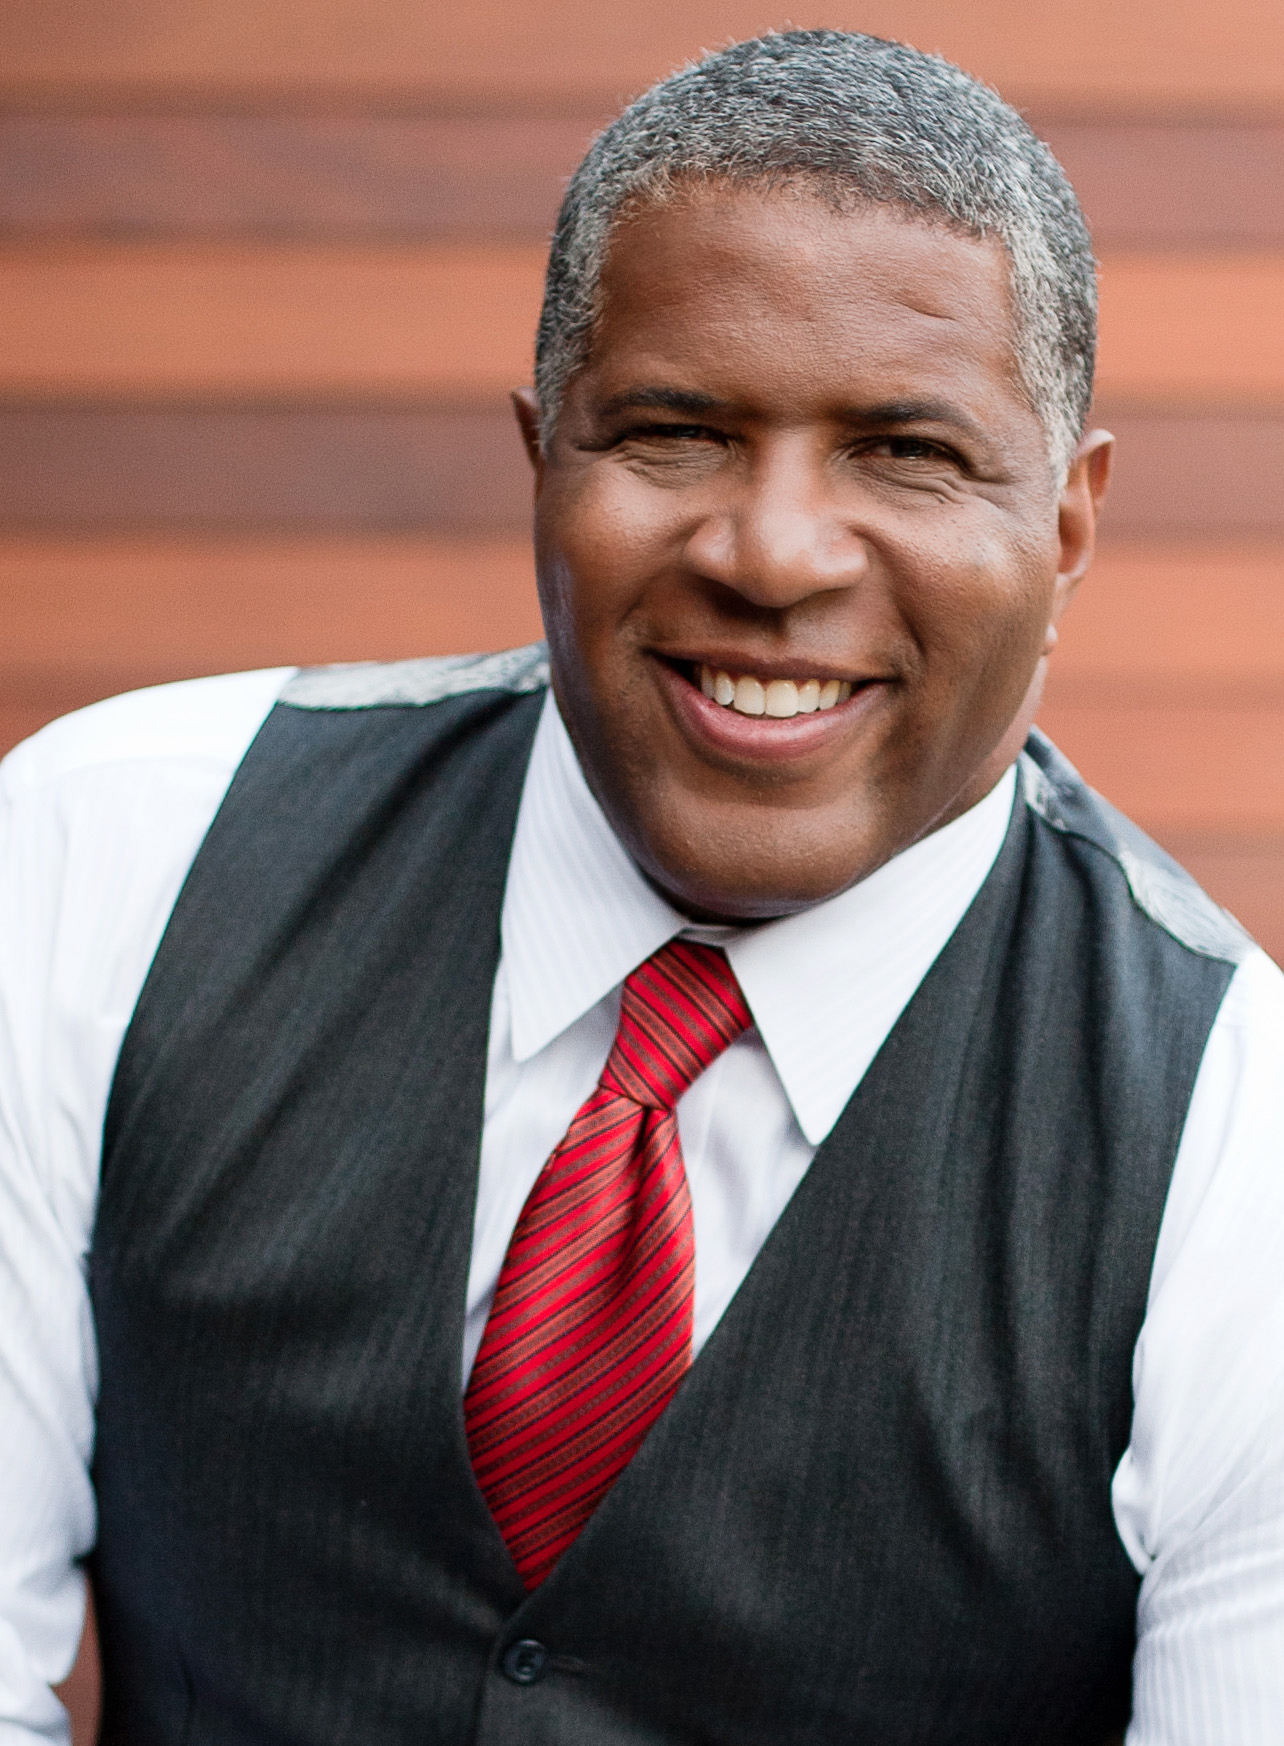 Headshot of philanthropist and entrepreneur Robert F. Smith who operates as Chairman and CEO of Vista Equity Partners